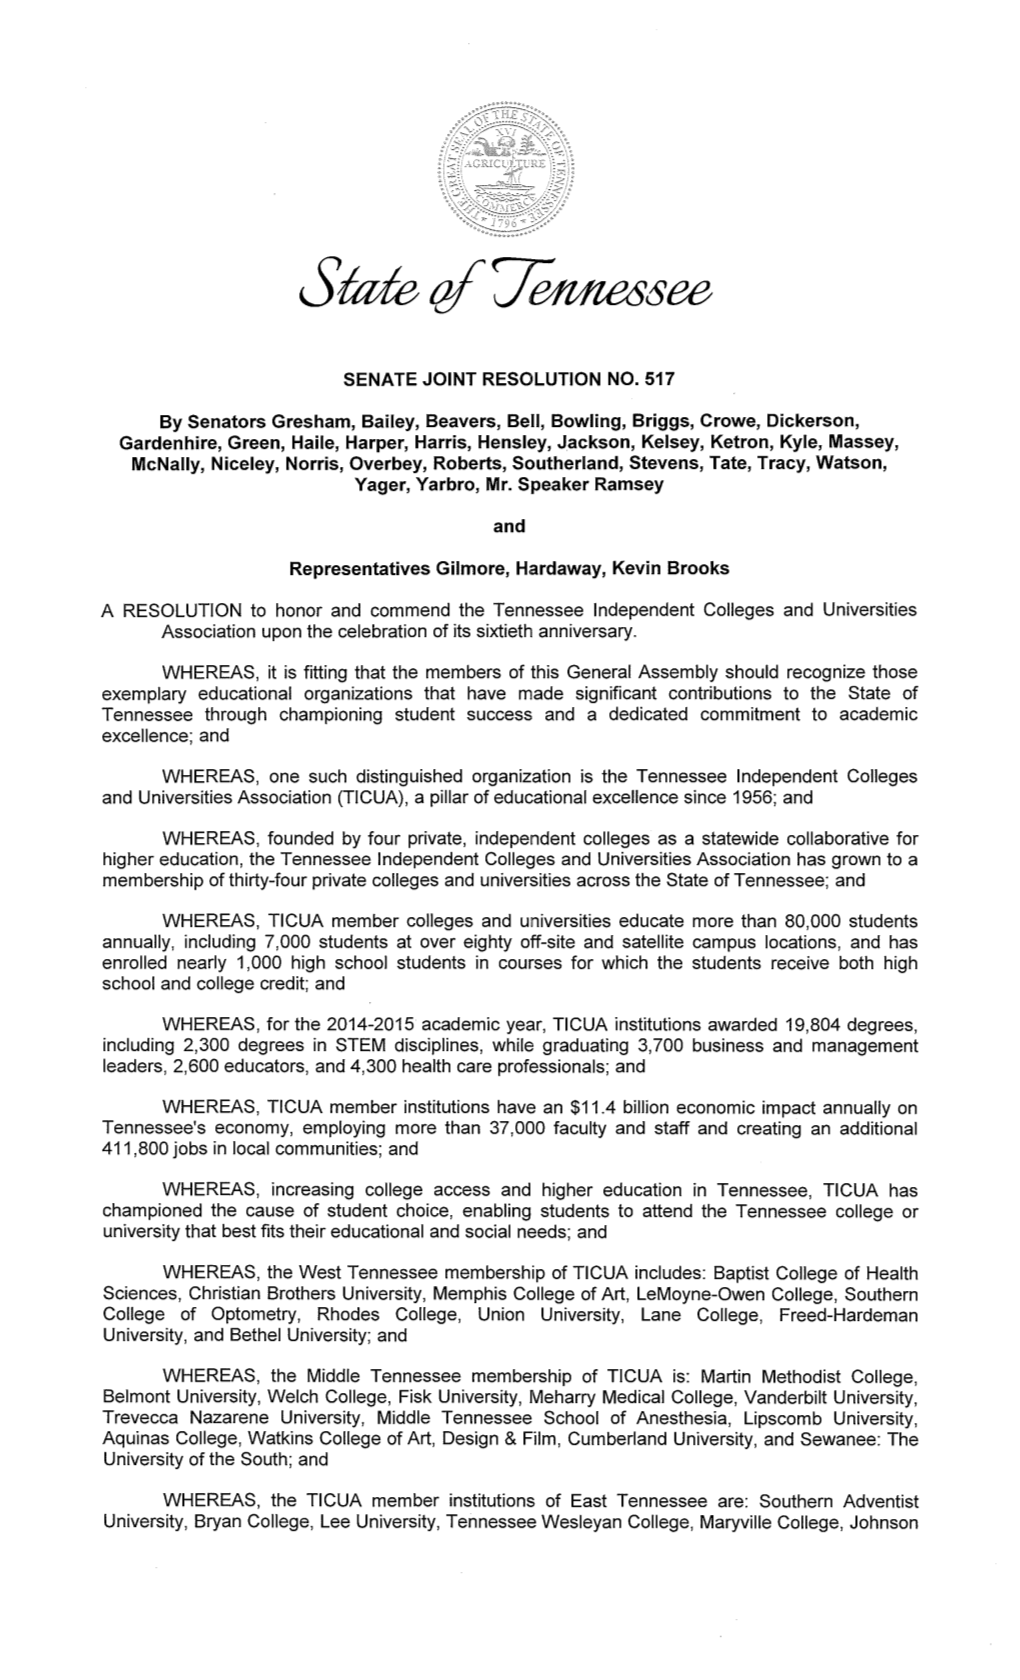 A RESOLUTION to Honor and Commend the Tennessee Independent Colleges and Universities Association Upon the Celebration of Its Sixtieth Anniversary